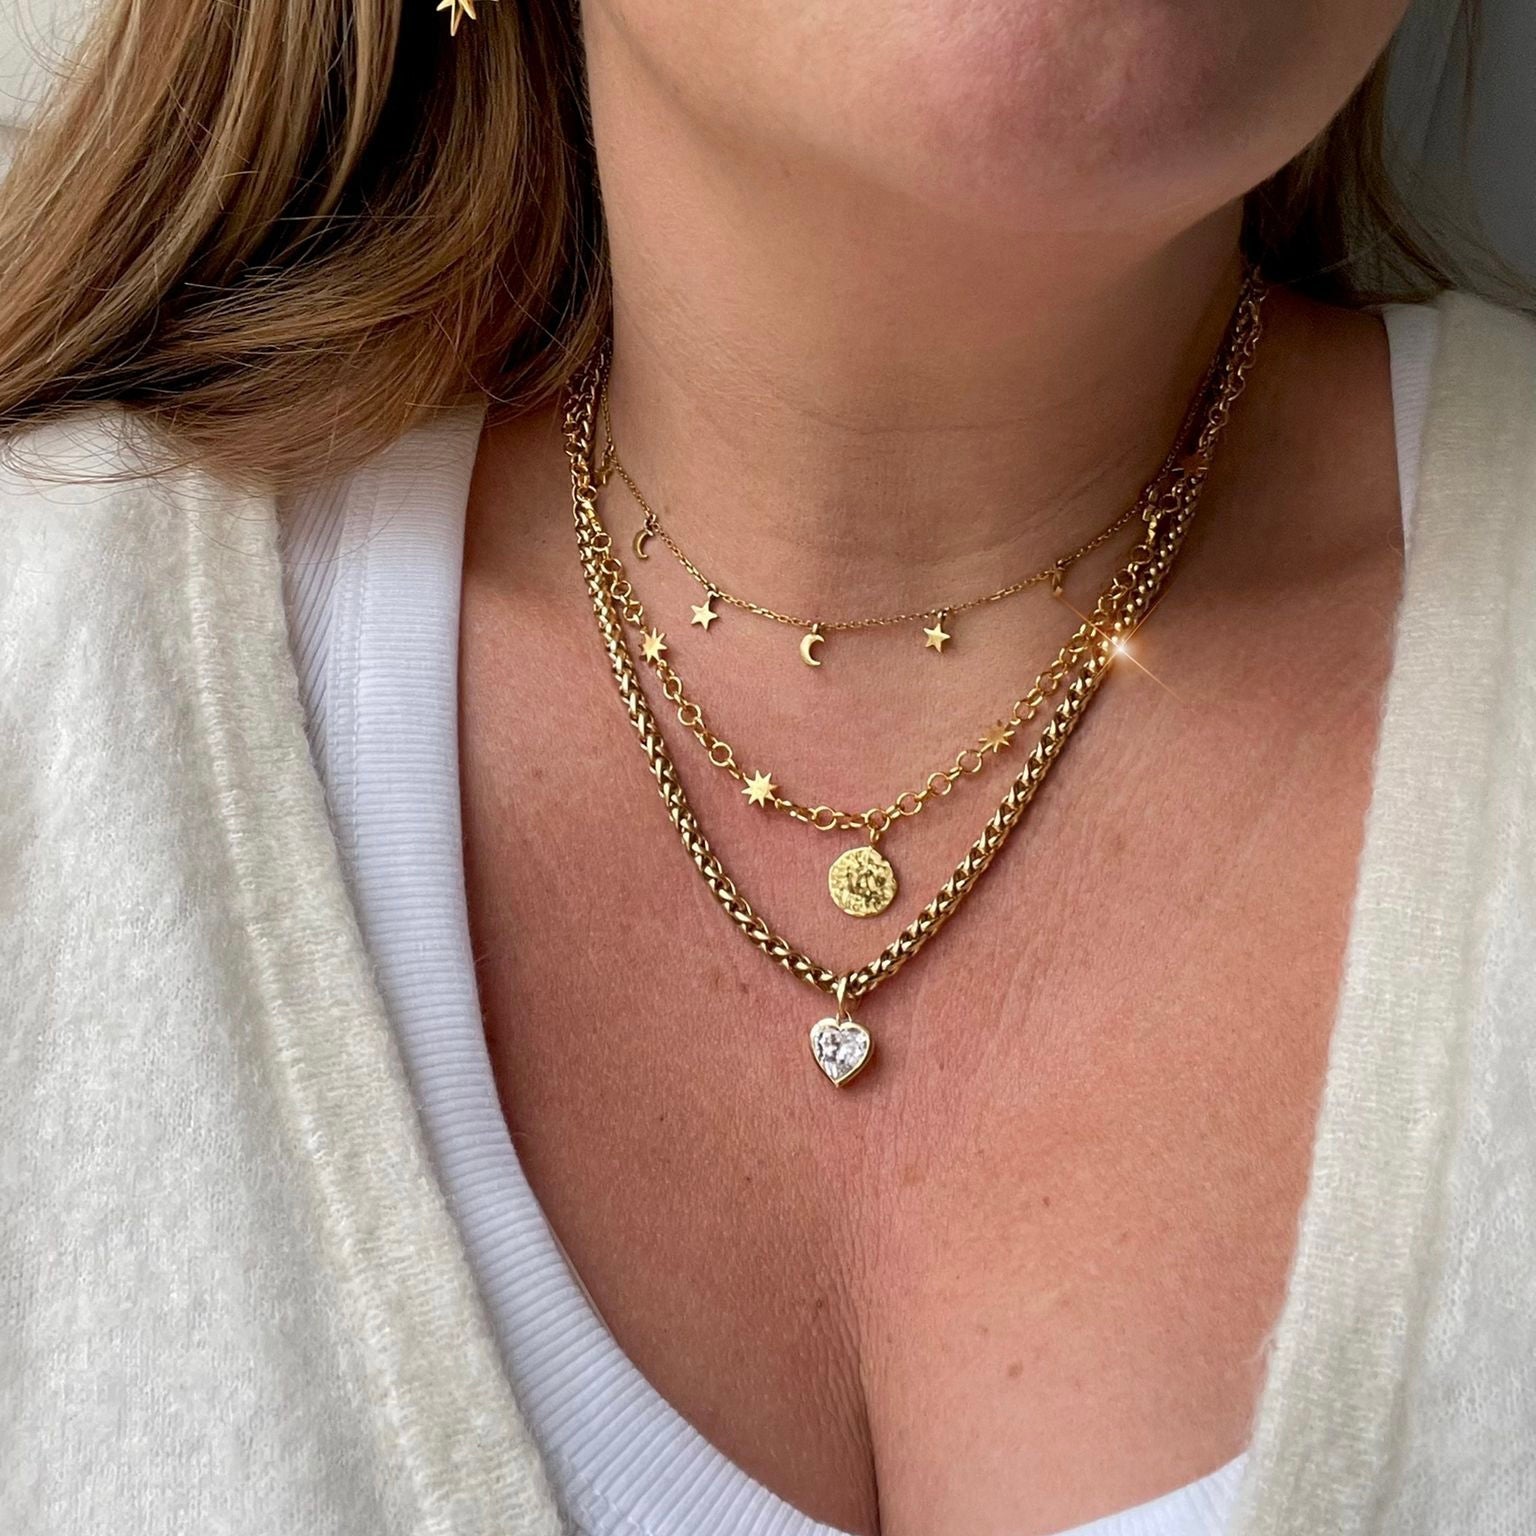 Gorgeous gold vermeil necklaces crafted by Carrie Elizabeth Jewellery 